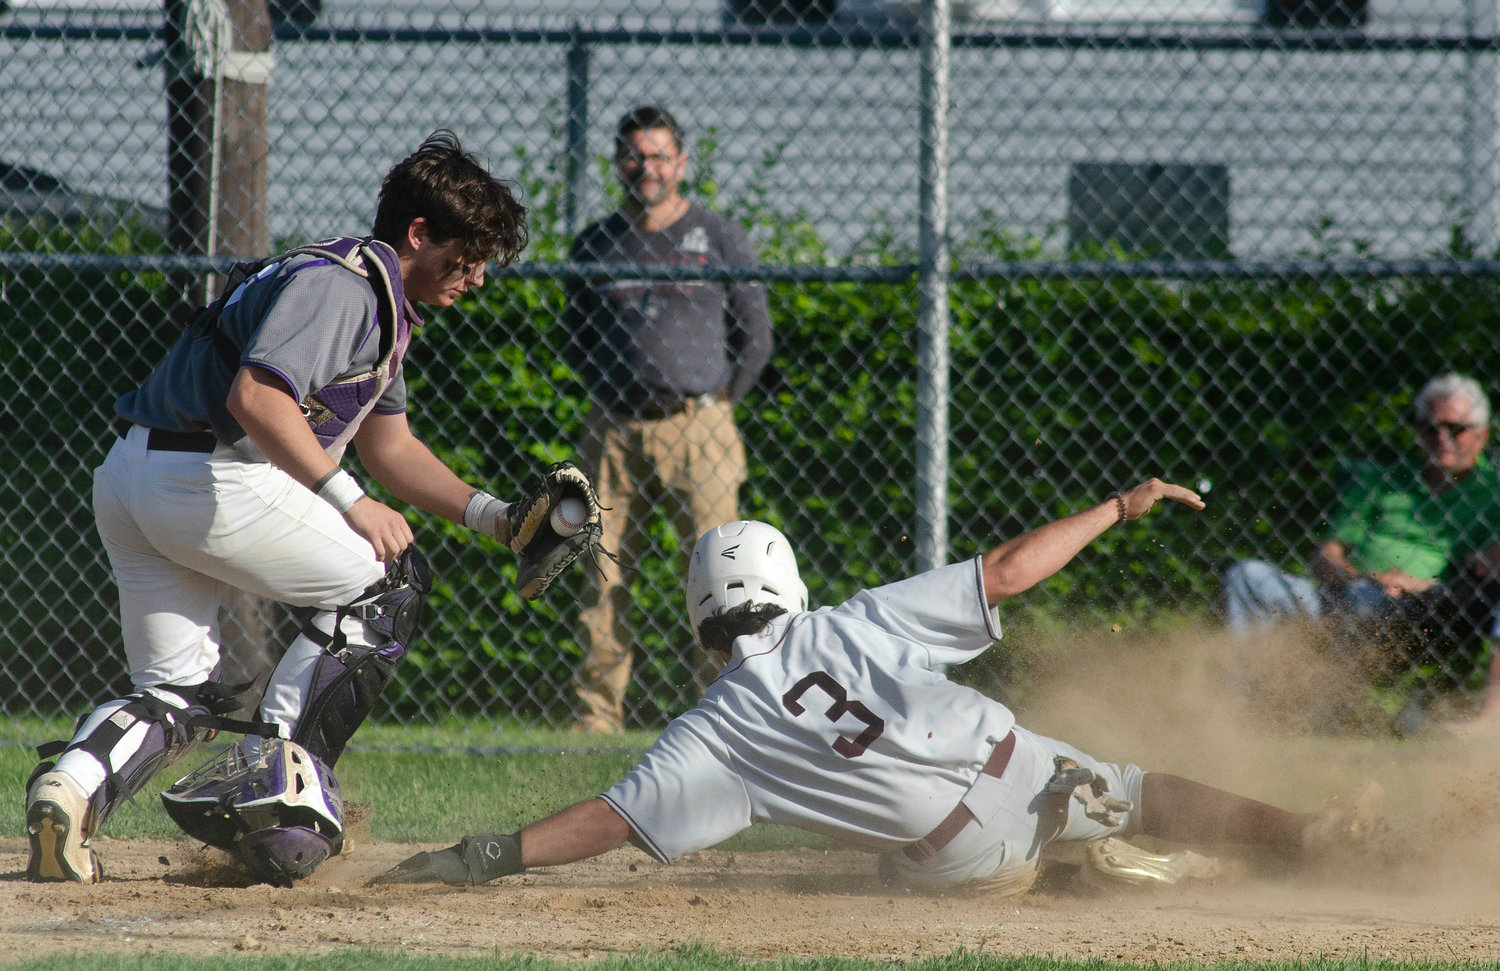 Senior catcher Jack Standish turns to see La Salle's Shea Caton slide by home plate without tagging it as the Ram tagged up at third base and ran home on a fly ball to right field. Standish walked over to Caton and tagged him out for the second out of the fifth inning.